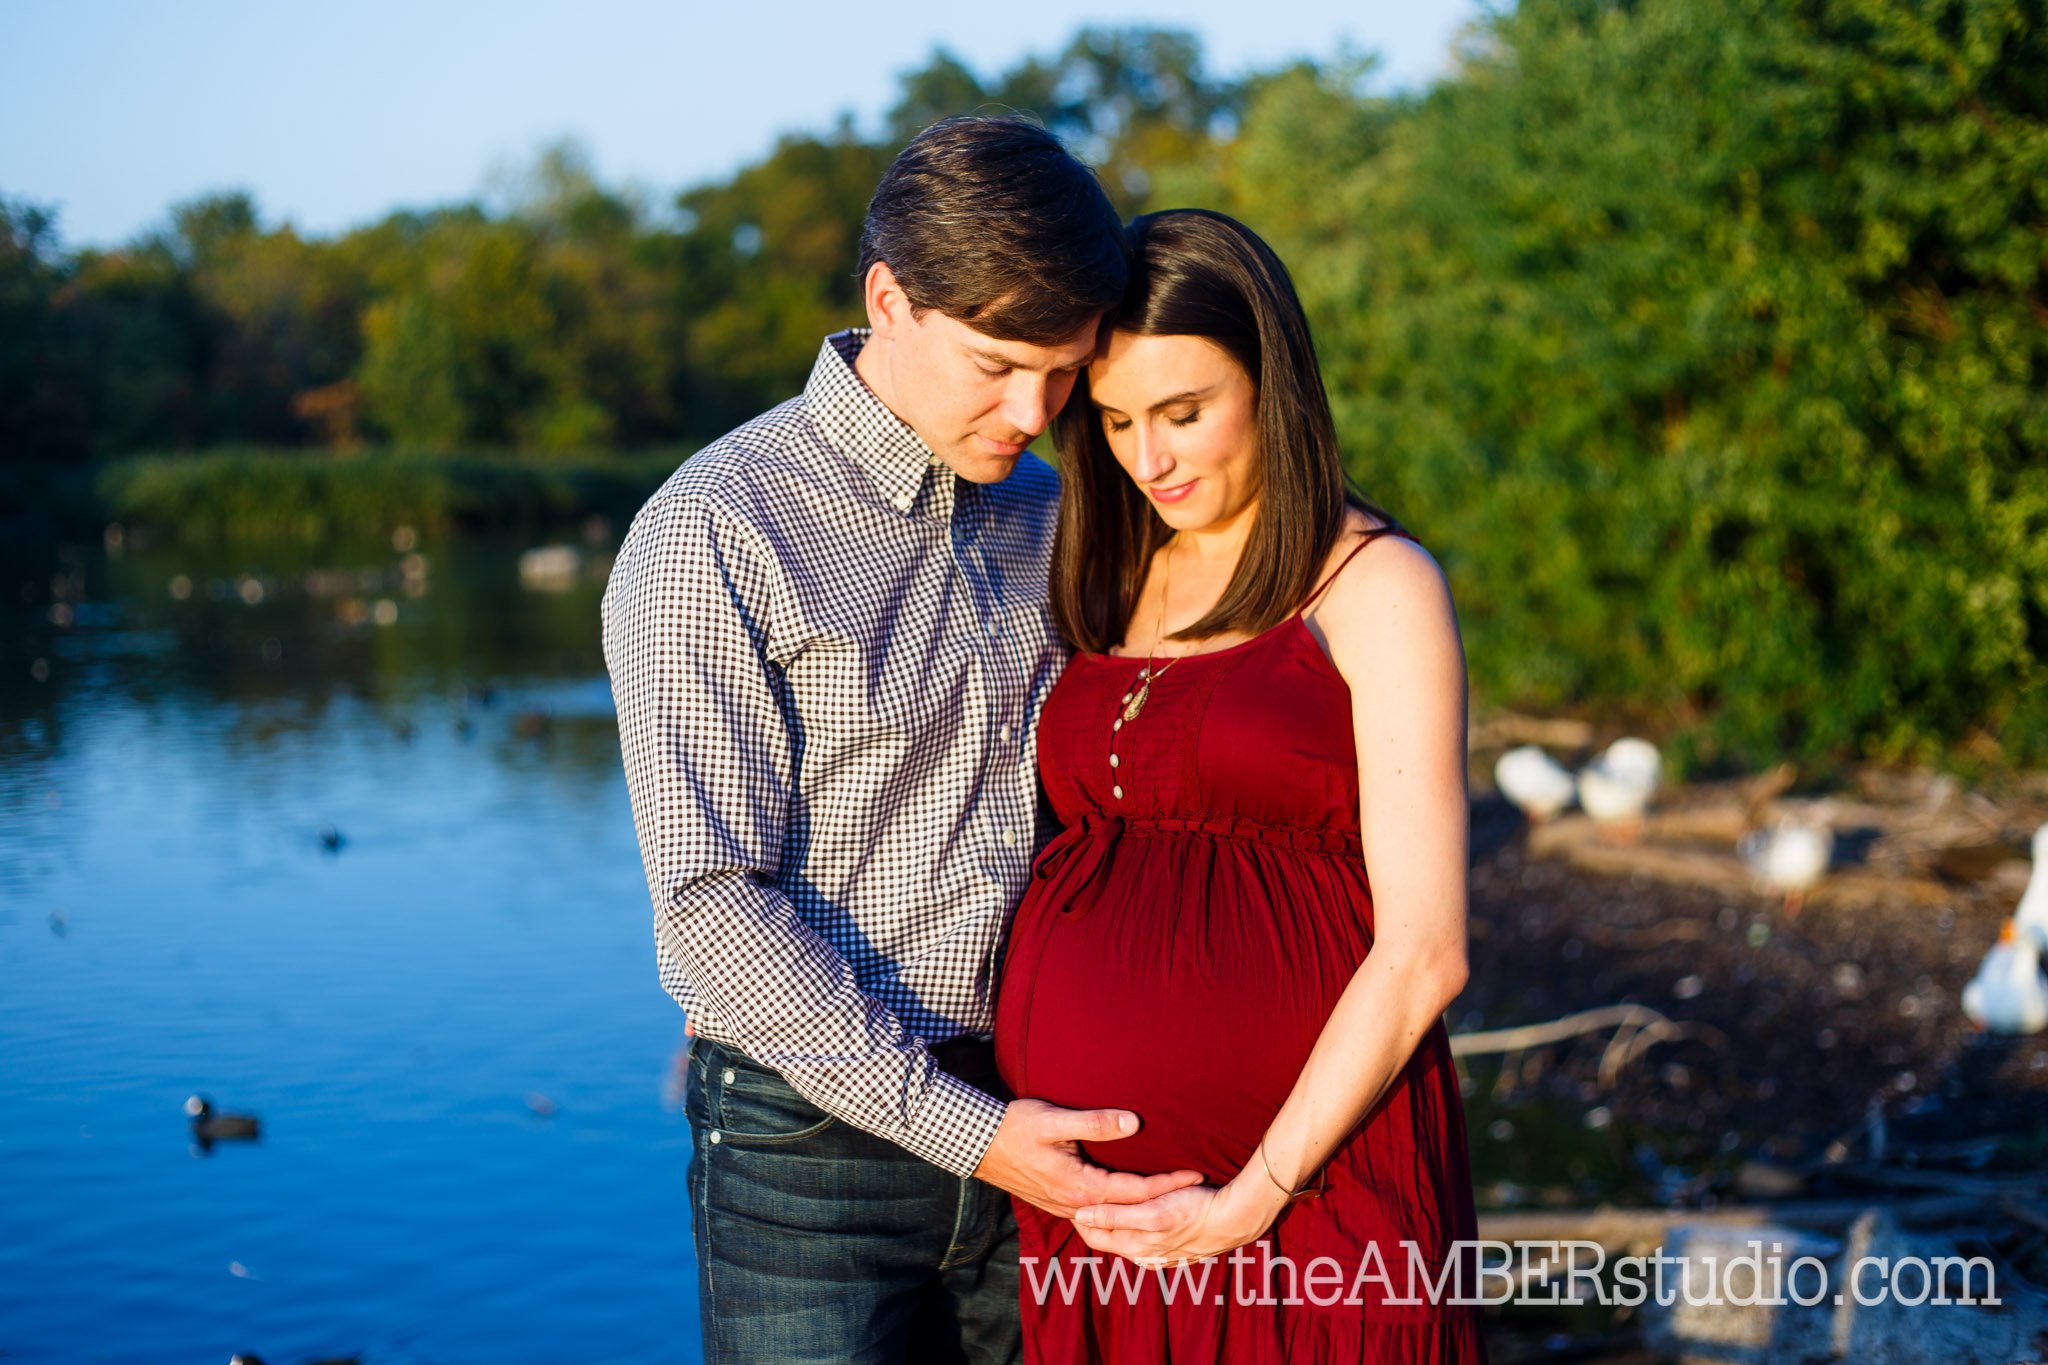 dallas-photographer-maternity-pregnant-preggers-baby-couple-married-white-rock-lake-dfw-texas-black-african-american-fall-burgundydress-jeans0012